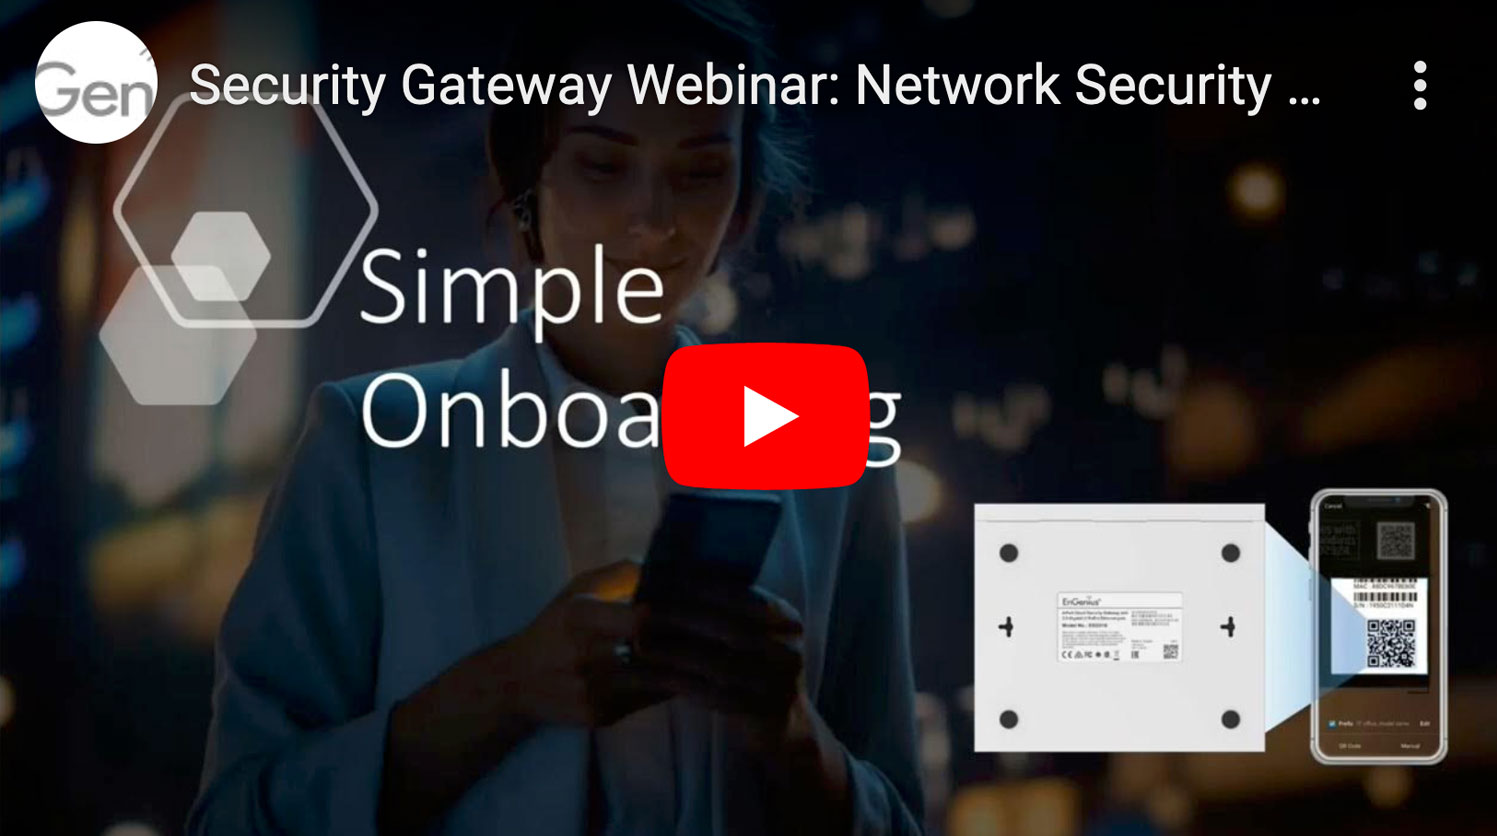 Security Gateway: Network Security Simplified